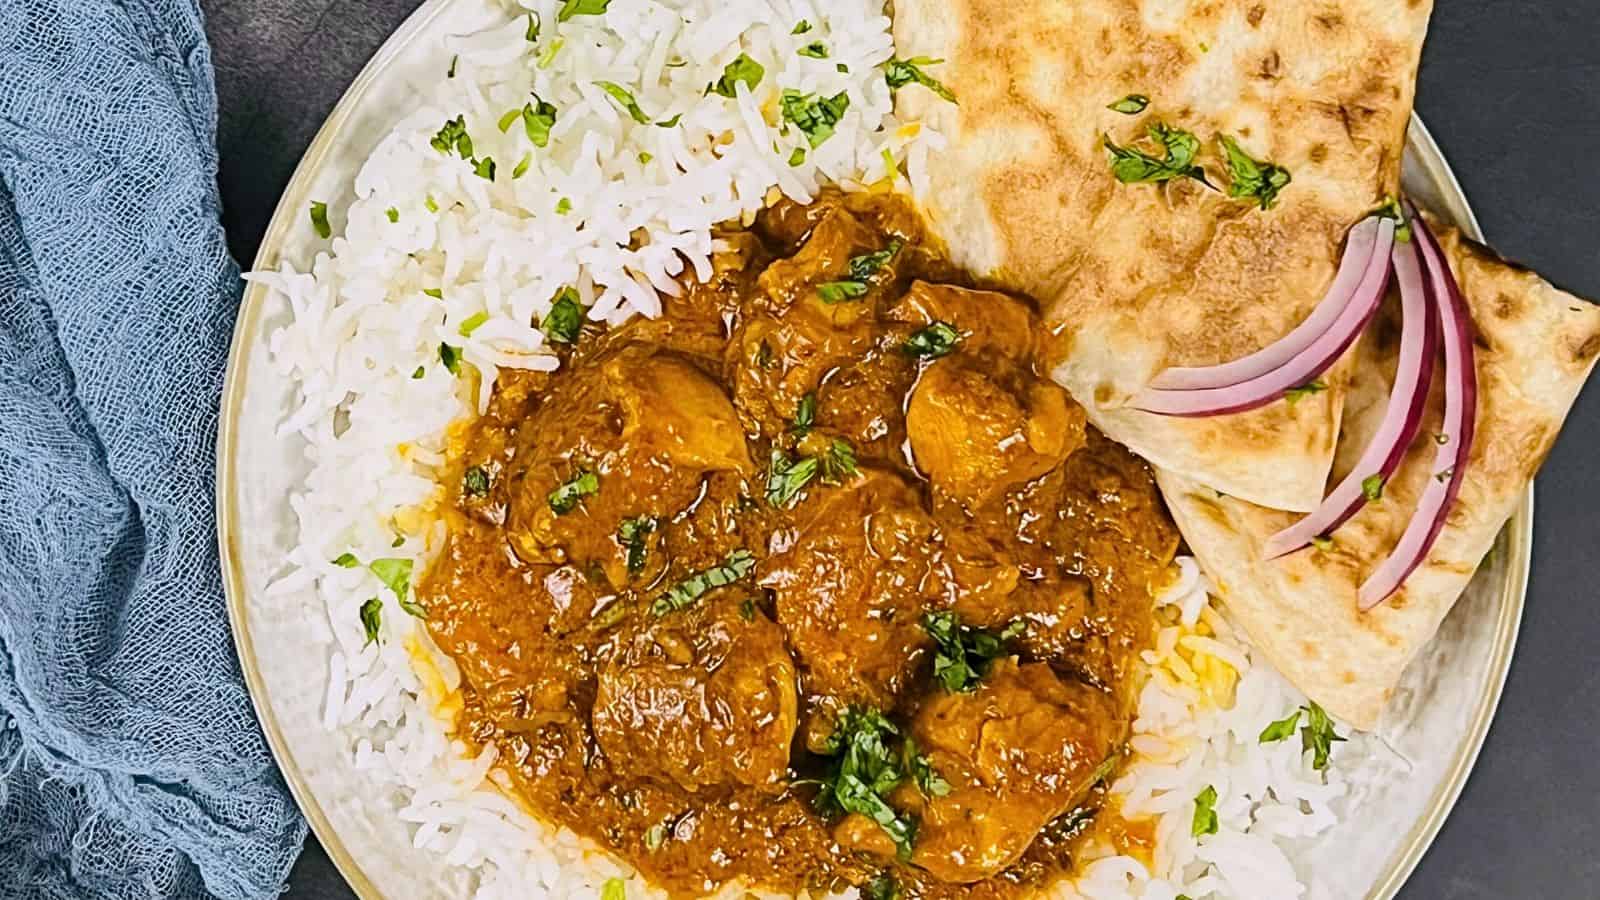 A plate of Chicken Masala with two pieces of naan and basmati rice garnished with herbs, served with sliced onions on the side.